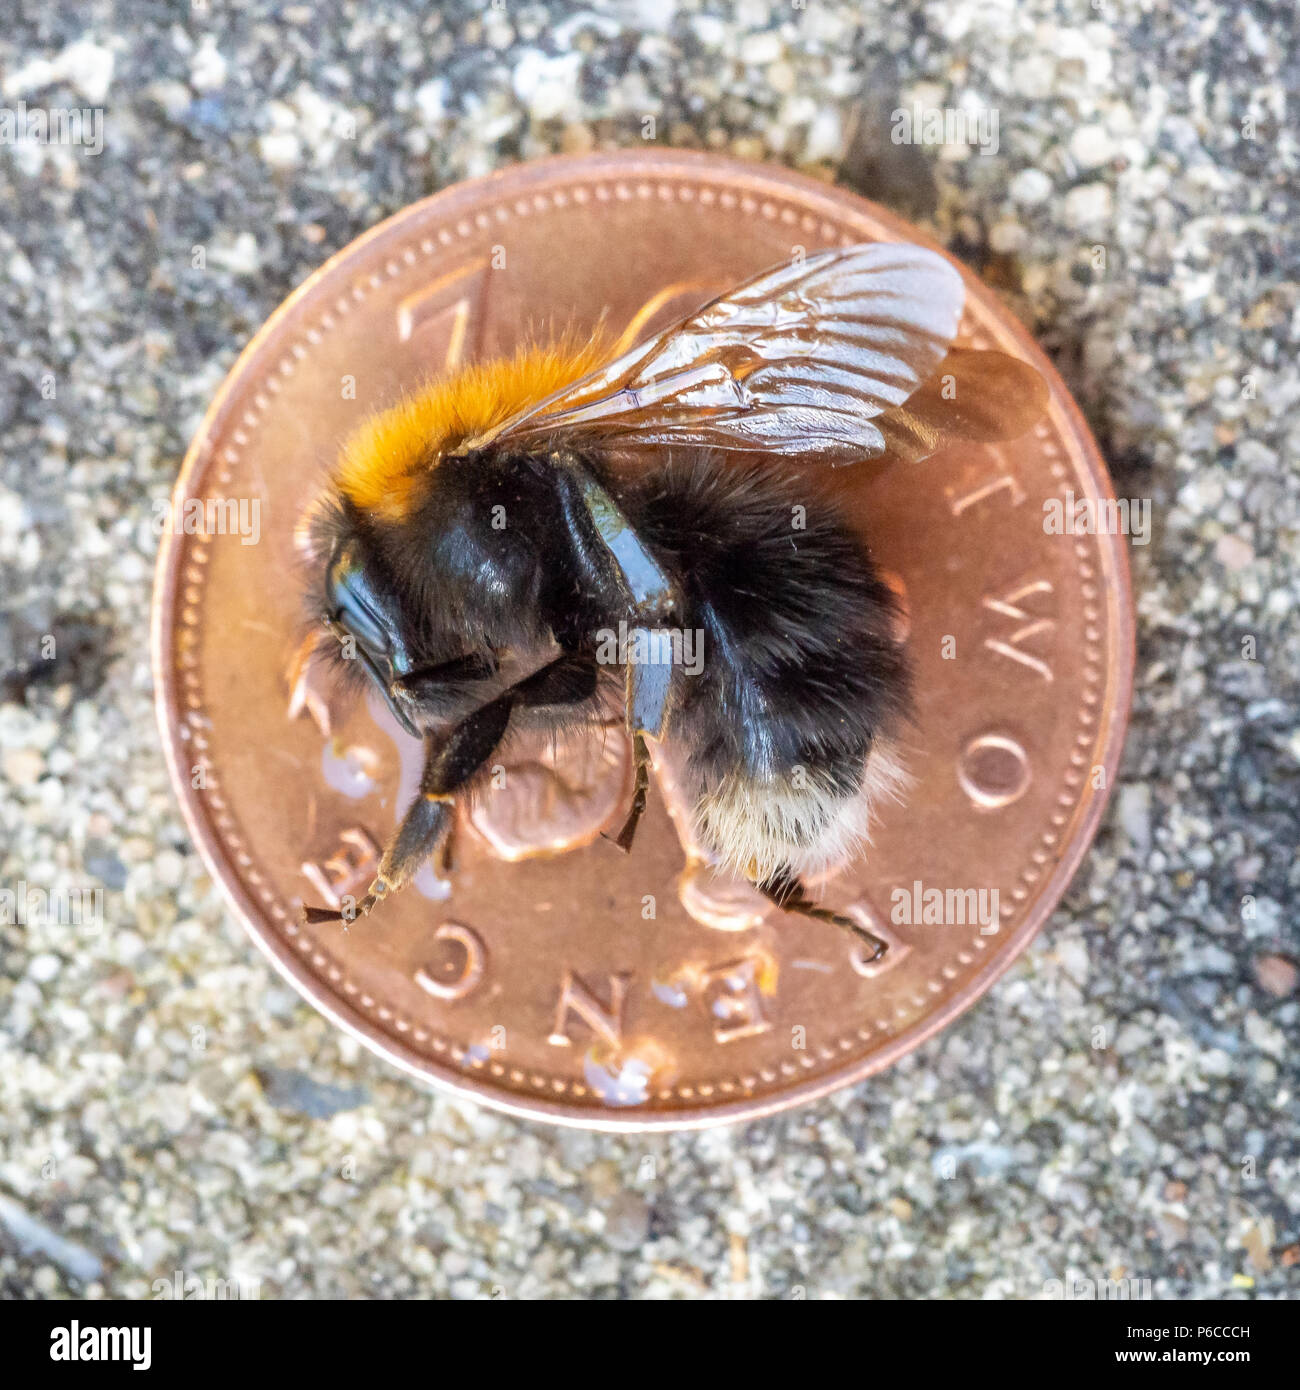 Dead bumble bee lying on a two pence piece despite attempts to revive it with sugary water Stock Photo